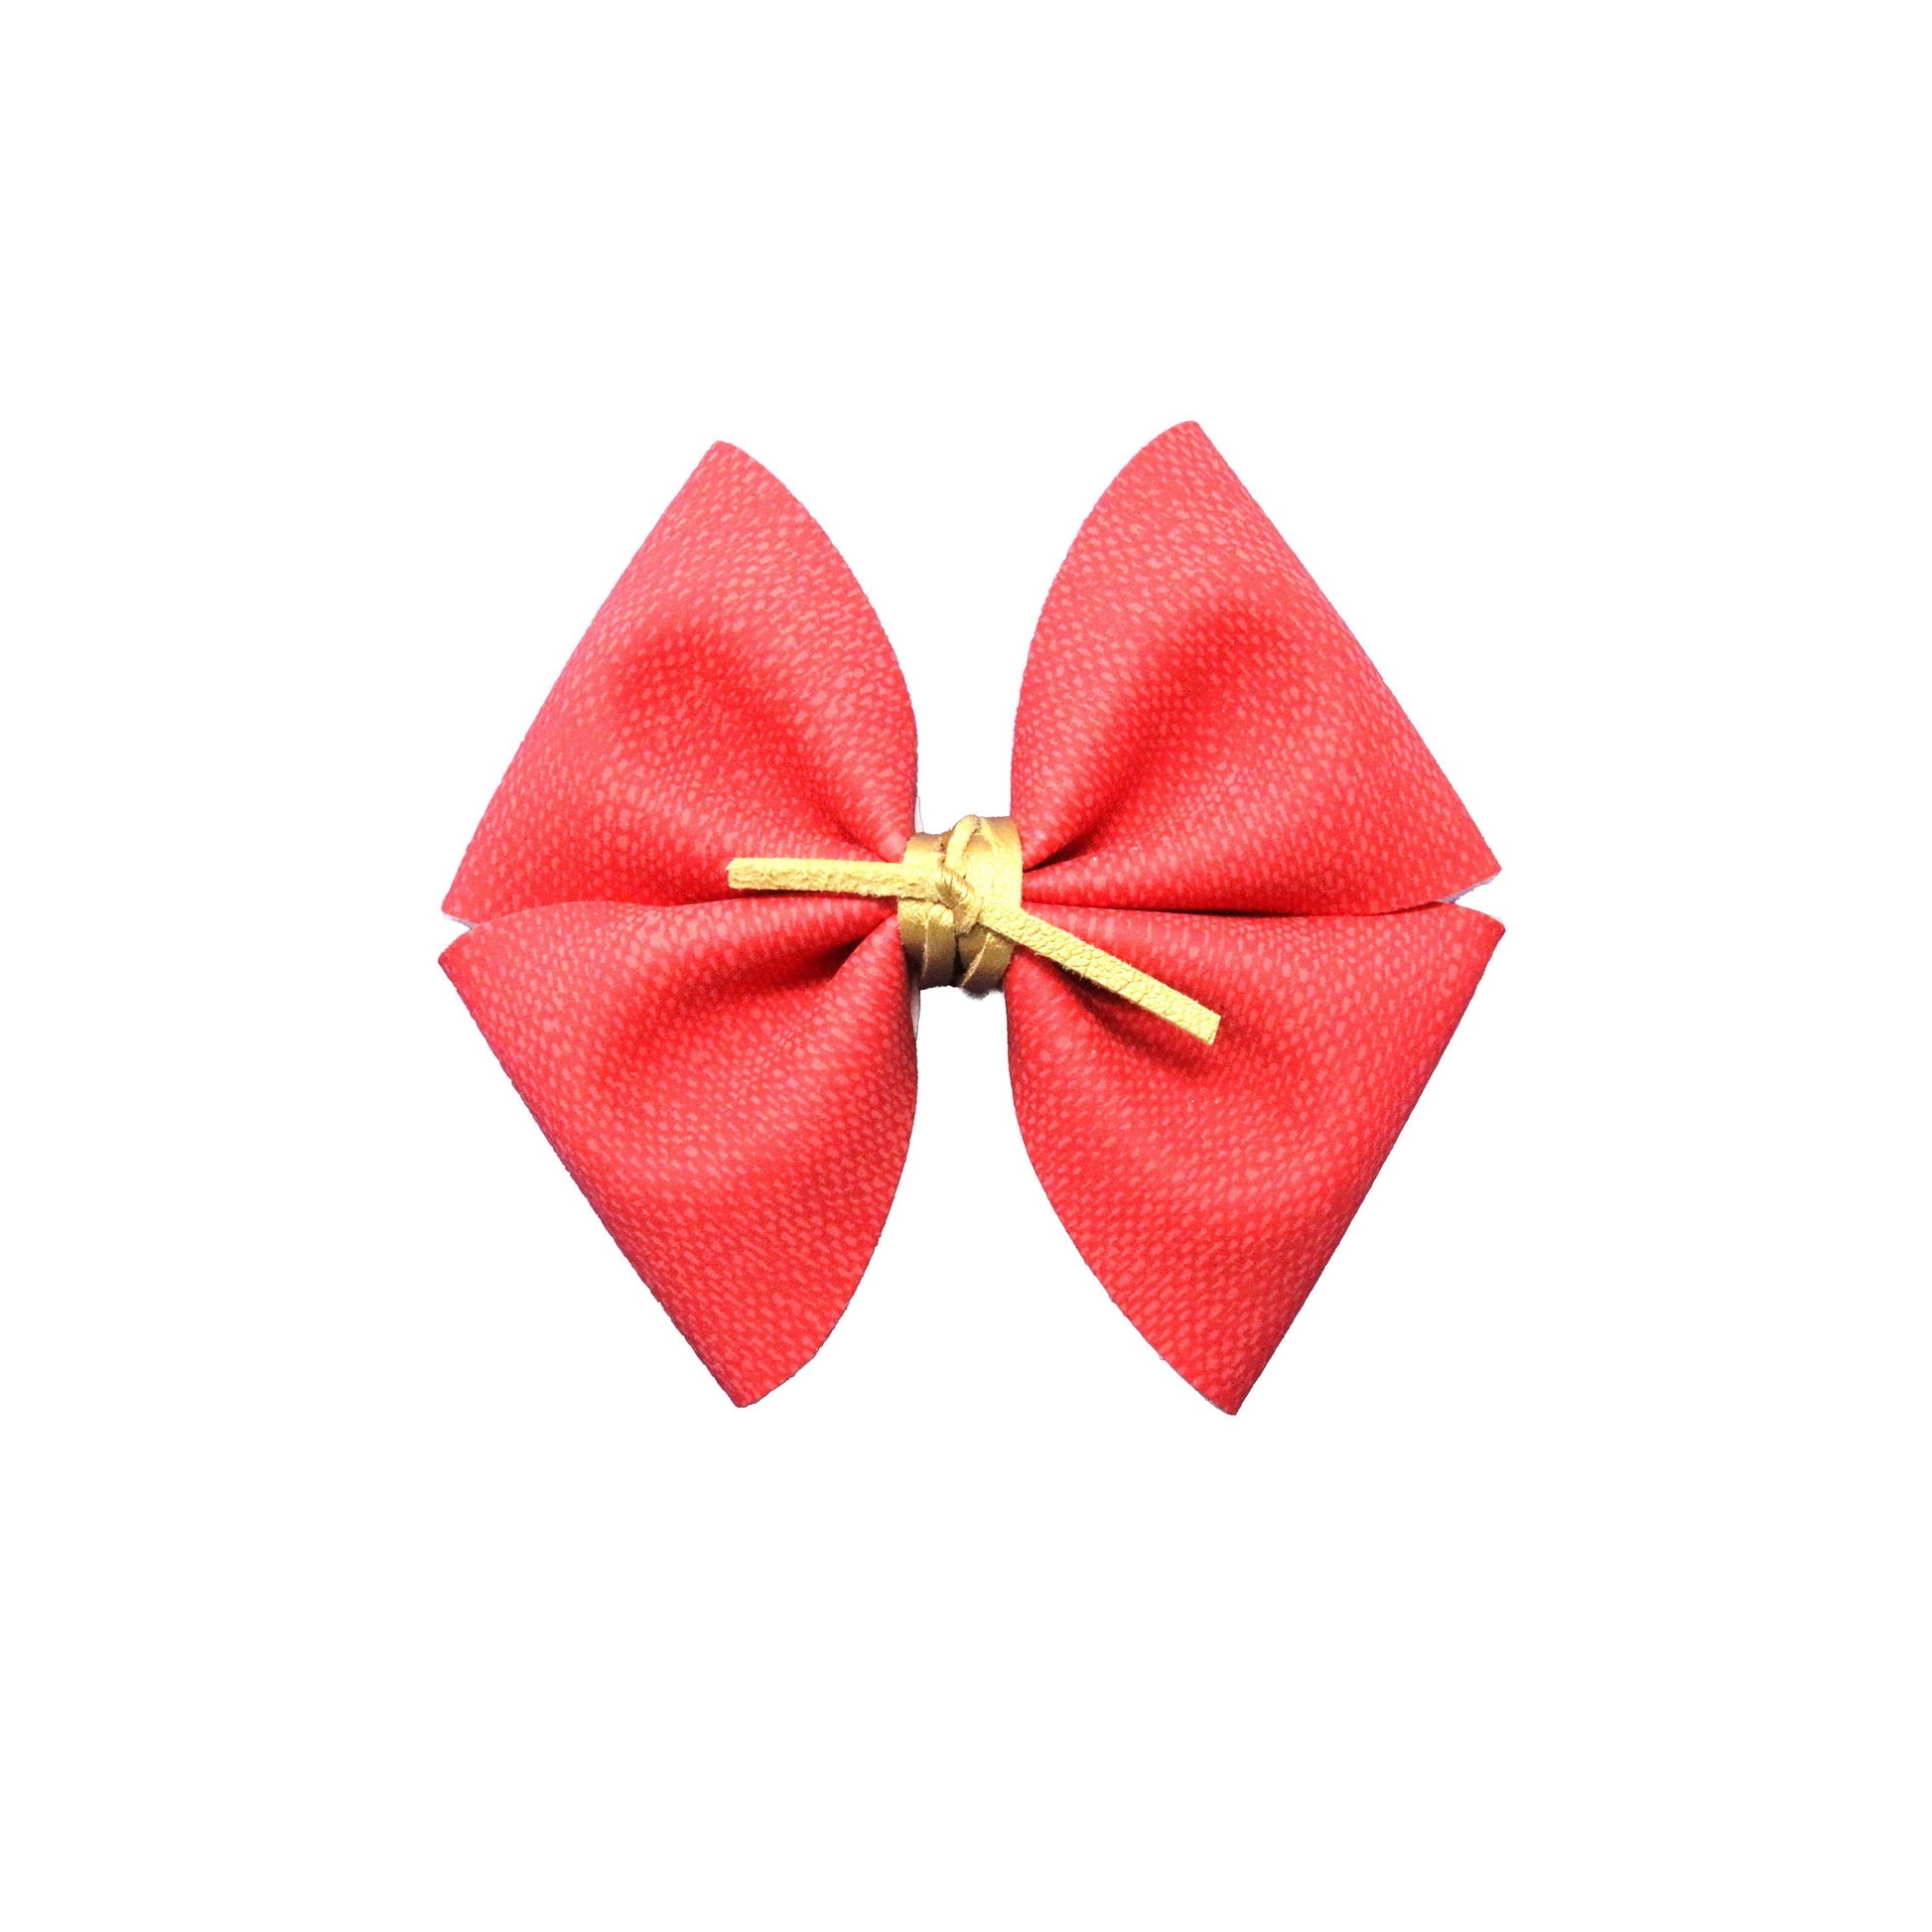 4 inch Red Linen Fluffy Petal Pinch Bow with Gold Cord Tie